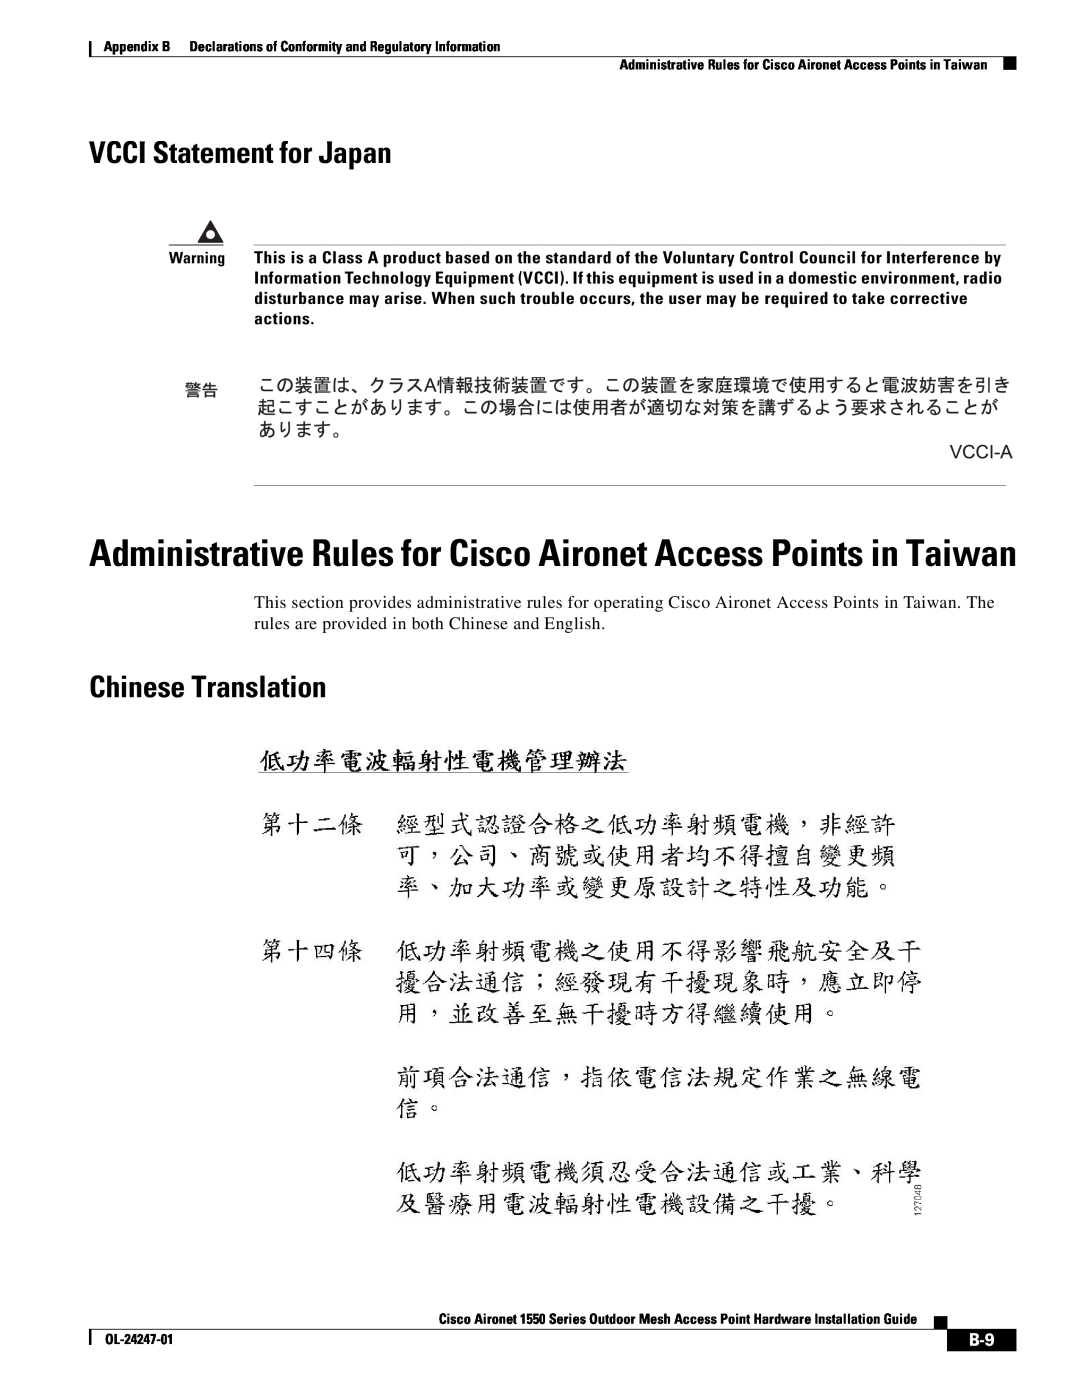 Cisco Systems AIRCAP1552EUAK9 Administrative Rules for Cisco Aironet Access Points in Taiwan, VCCI Statement for Japan 